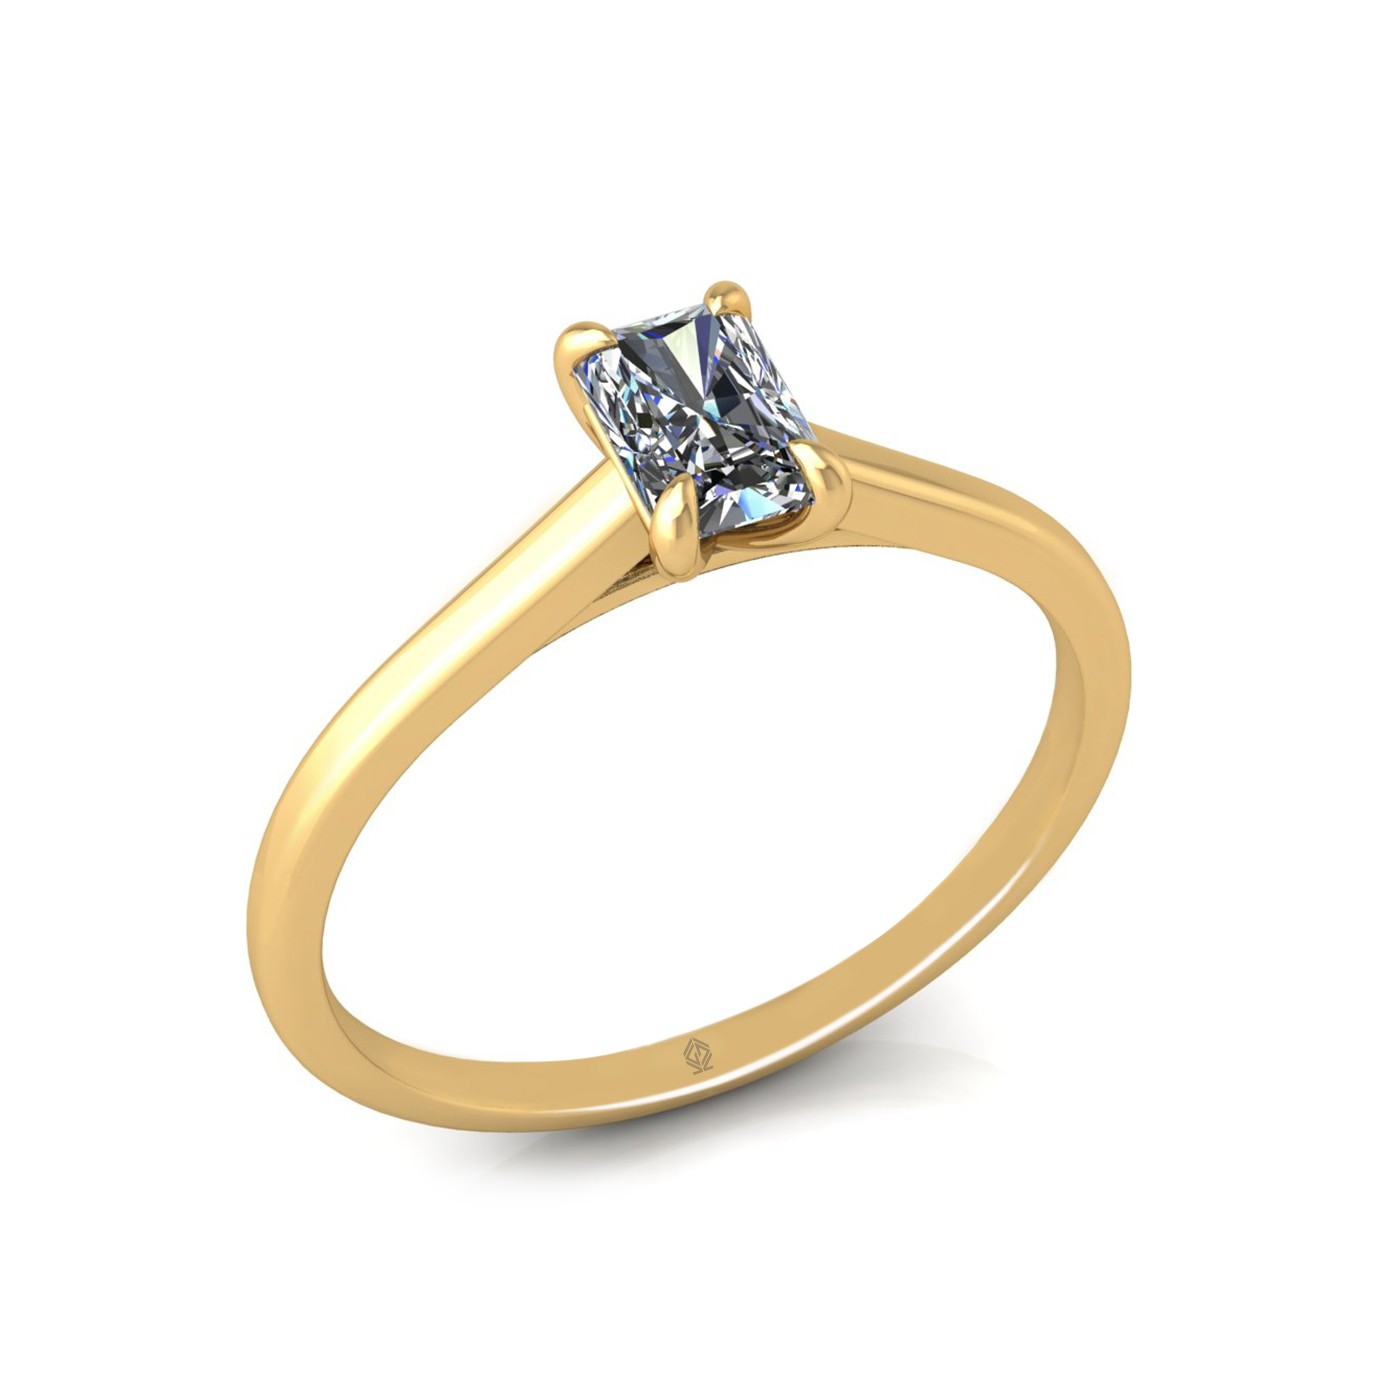 18k yellow gold  0,50 ct 4 prongs solitaire radiant cut diamond engagement ring with whisper thin band